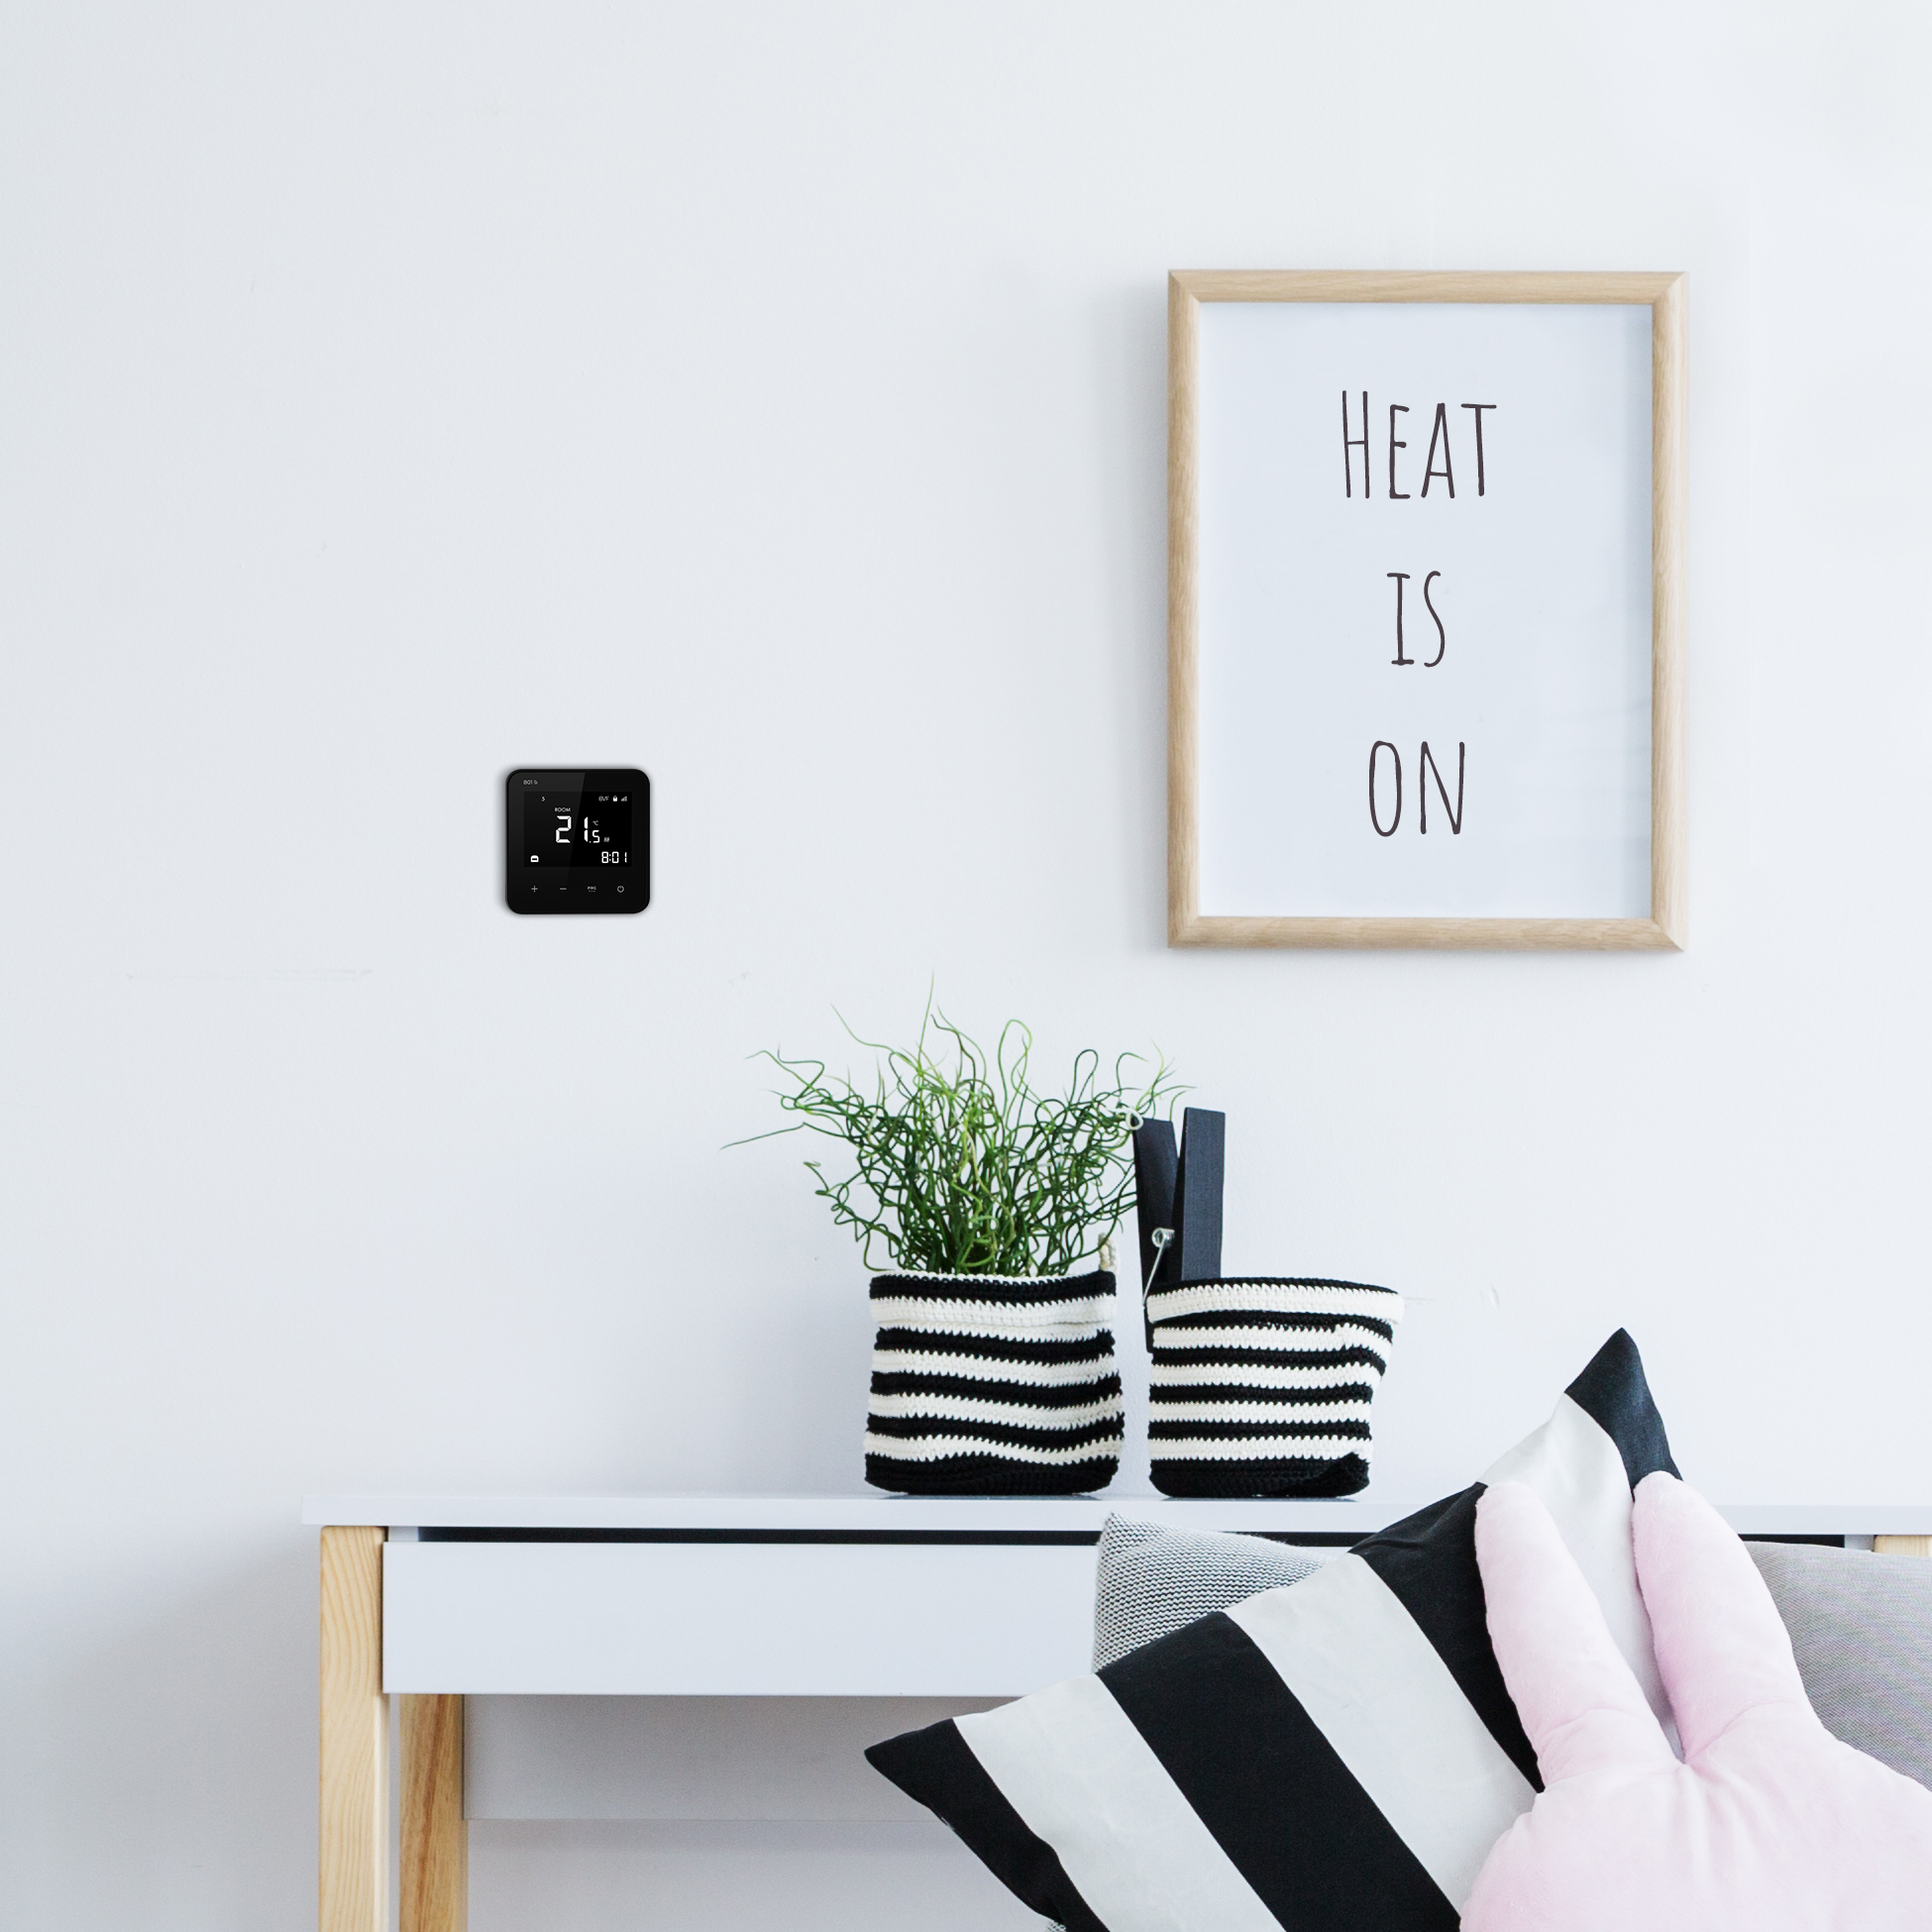 Programmable Thermostat, 801 via WiFi with mobile phone app. Black.